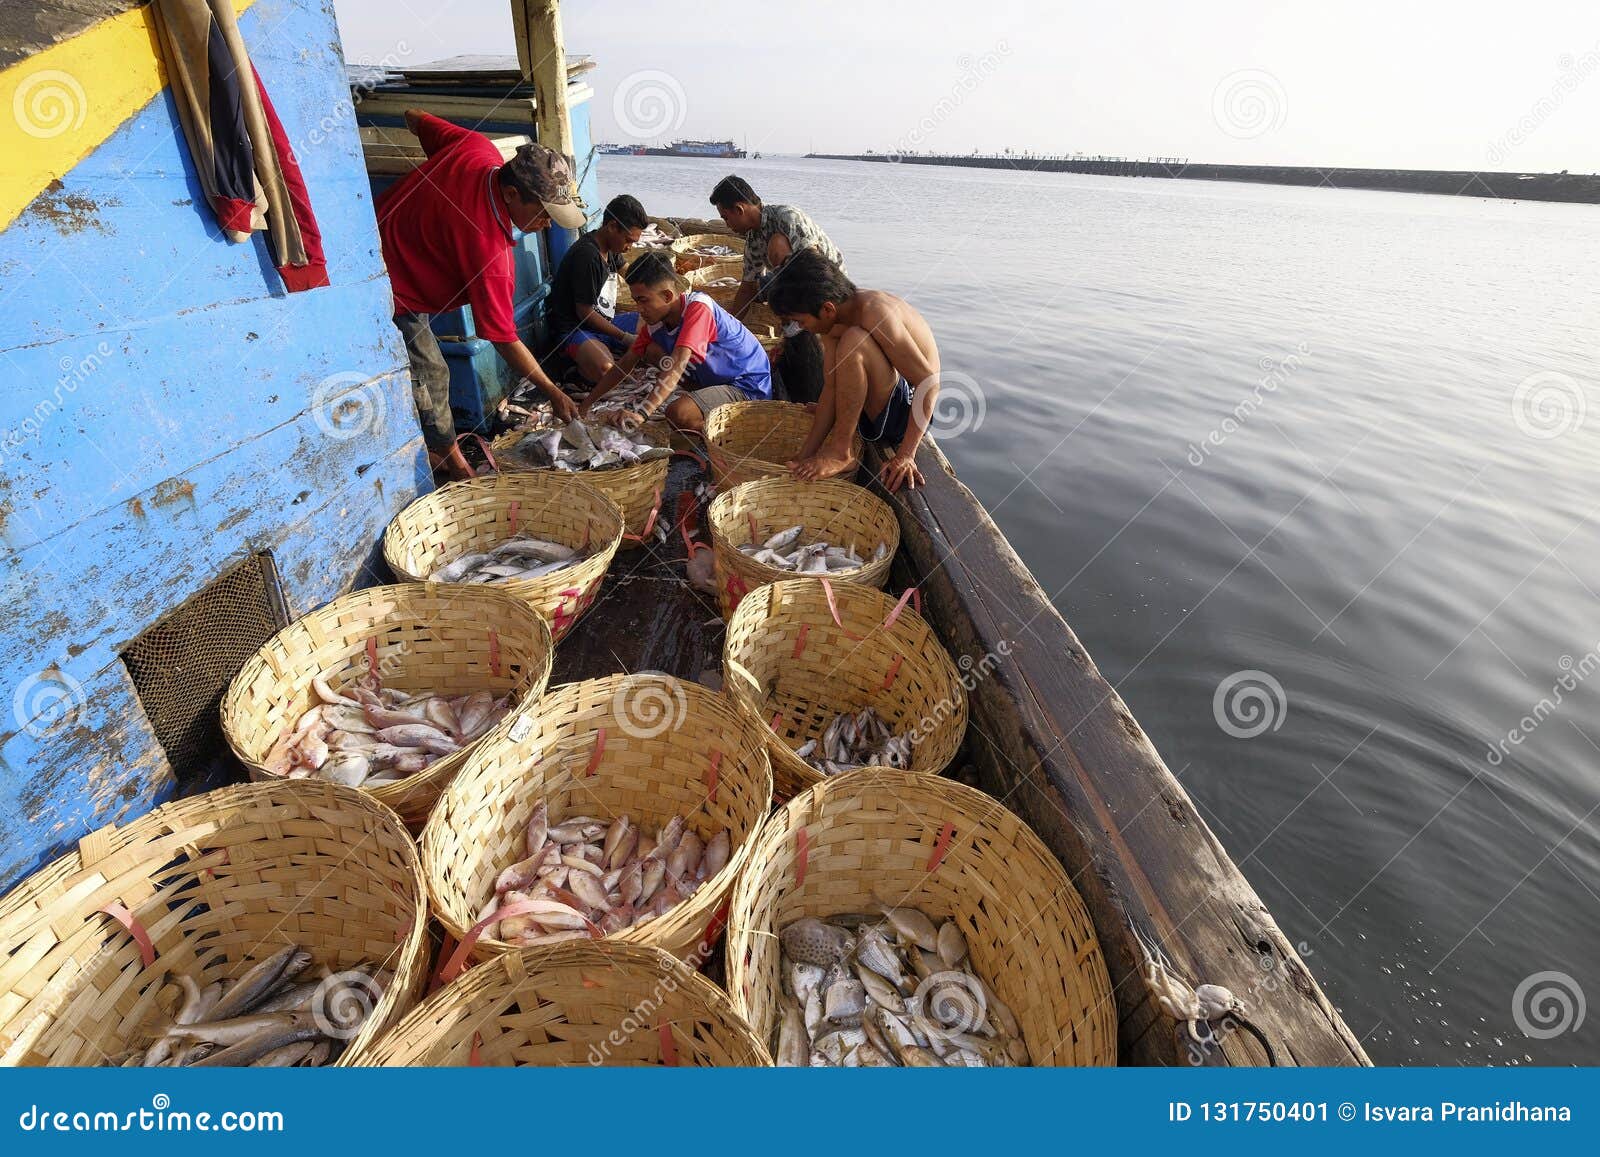 https://thumbs.dreamstime.com/z/fishing-activities-boat-probolinggo-indonesia-november-th-five-fisherman-were-sorting-out-fish-accroding-to-their-type-131750401.jpg